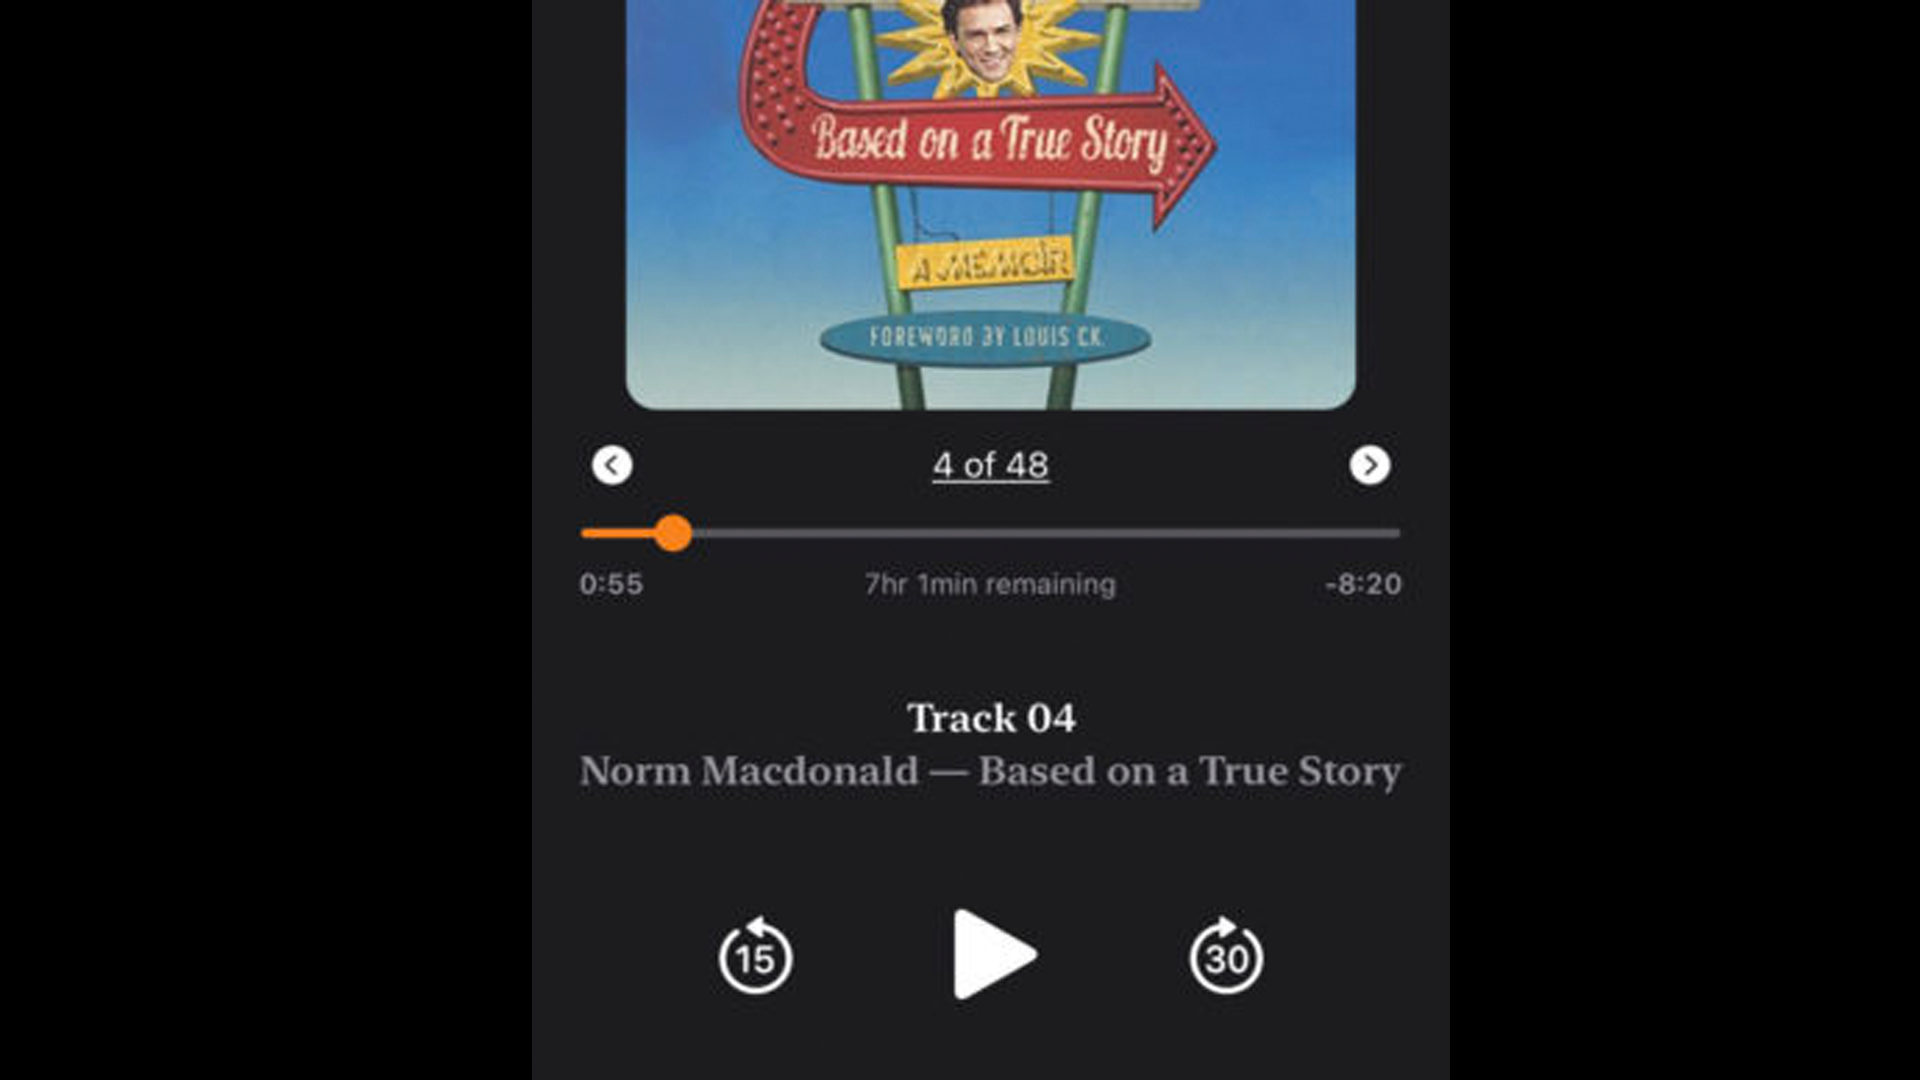 Screenshot of Audiobooks playing from Plex Media Server on an iPhone.